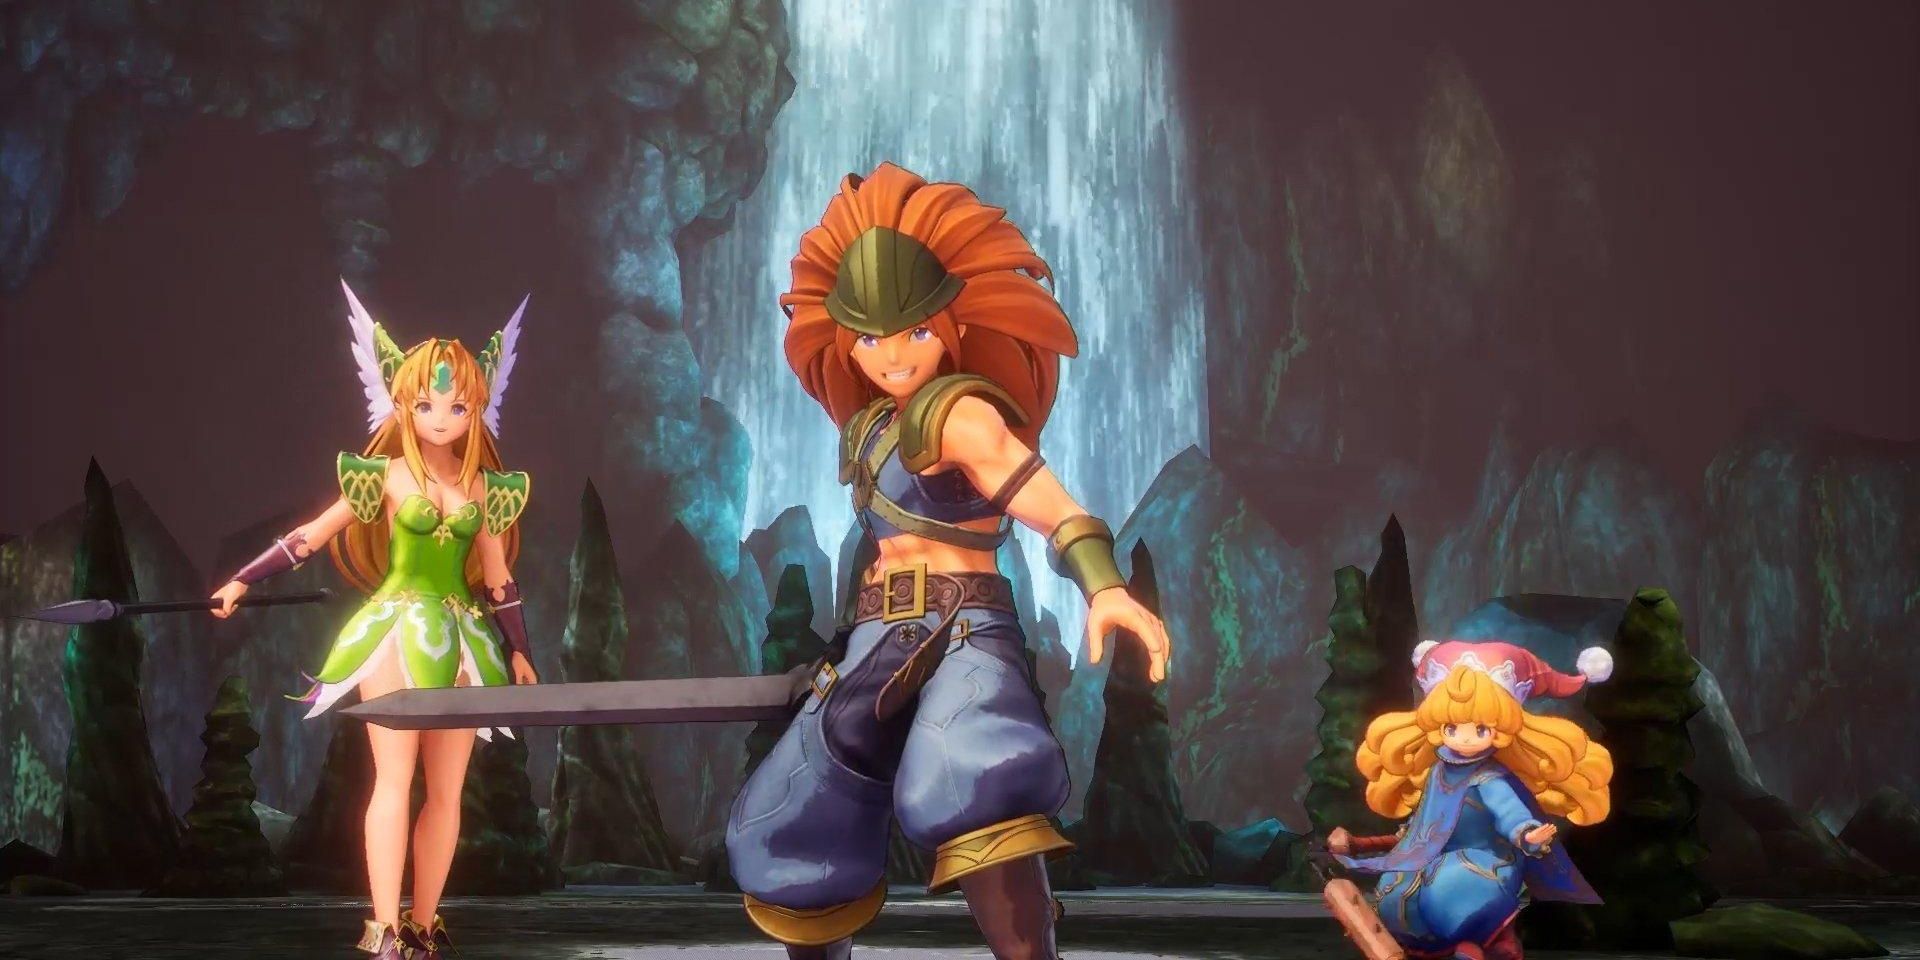 The Party in Trials of Mana